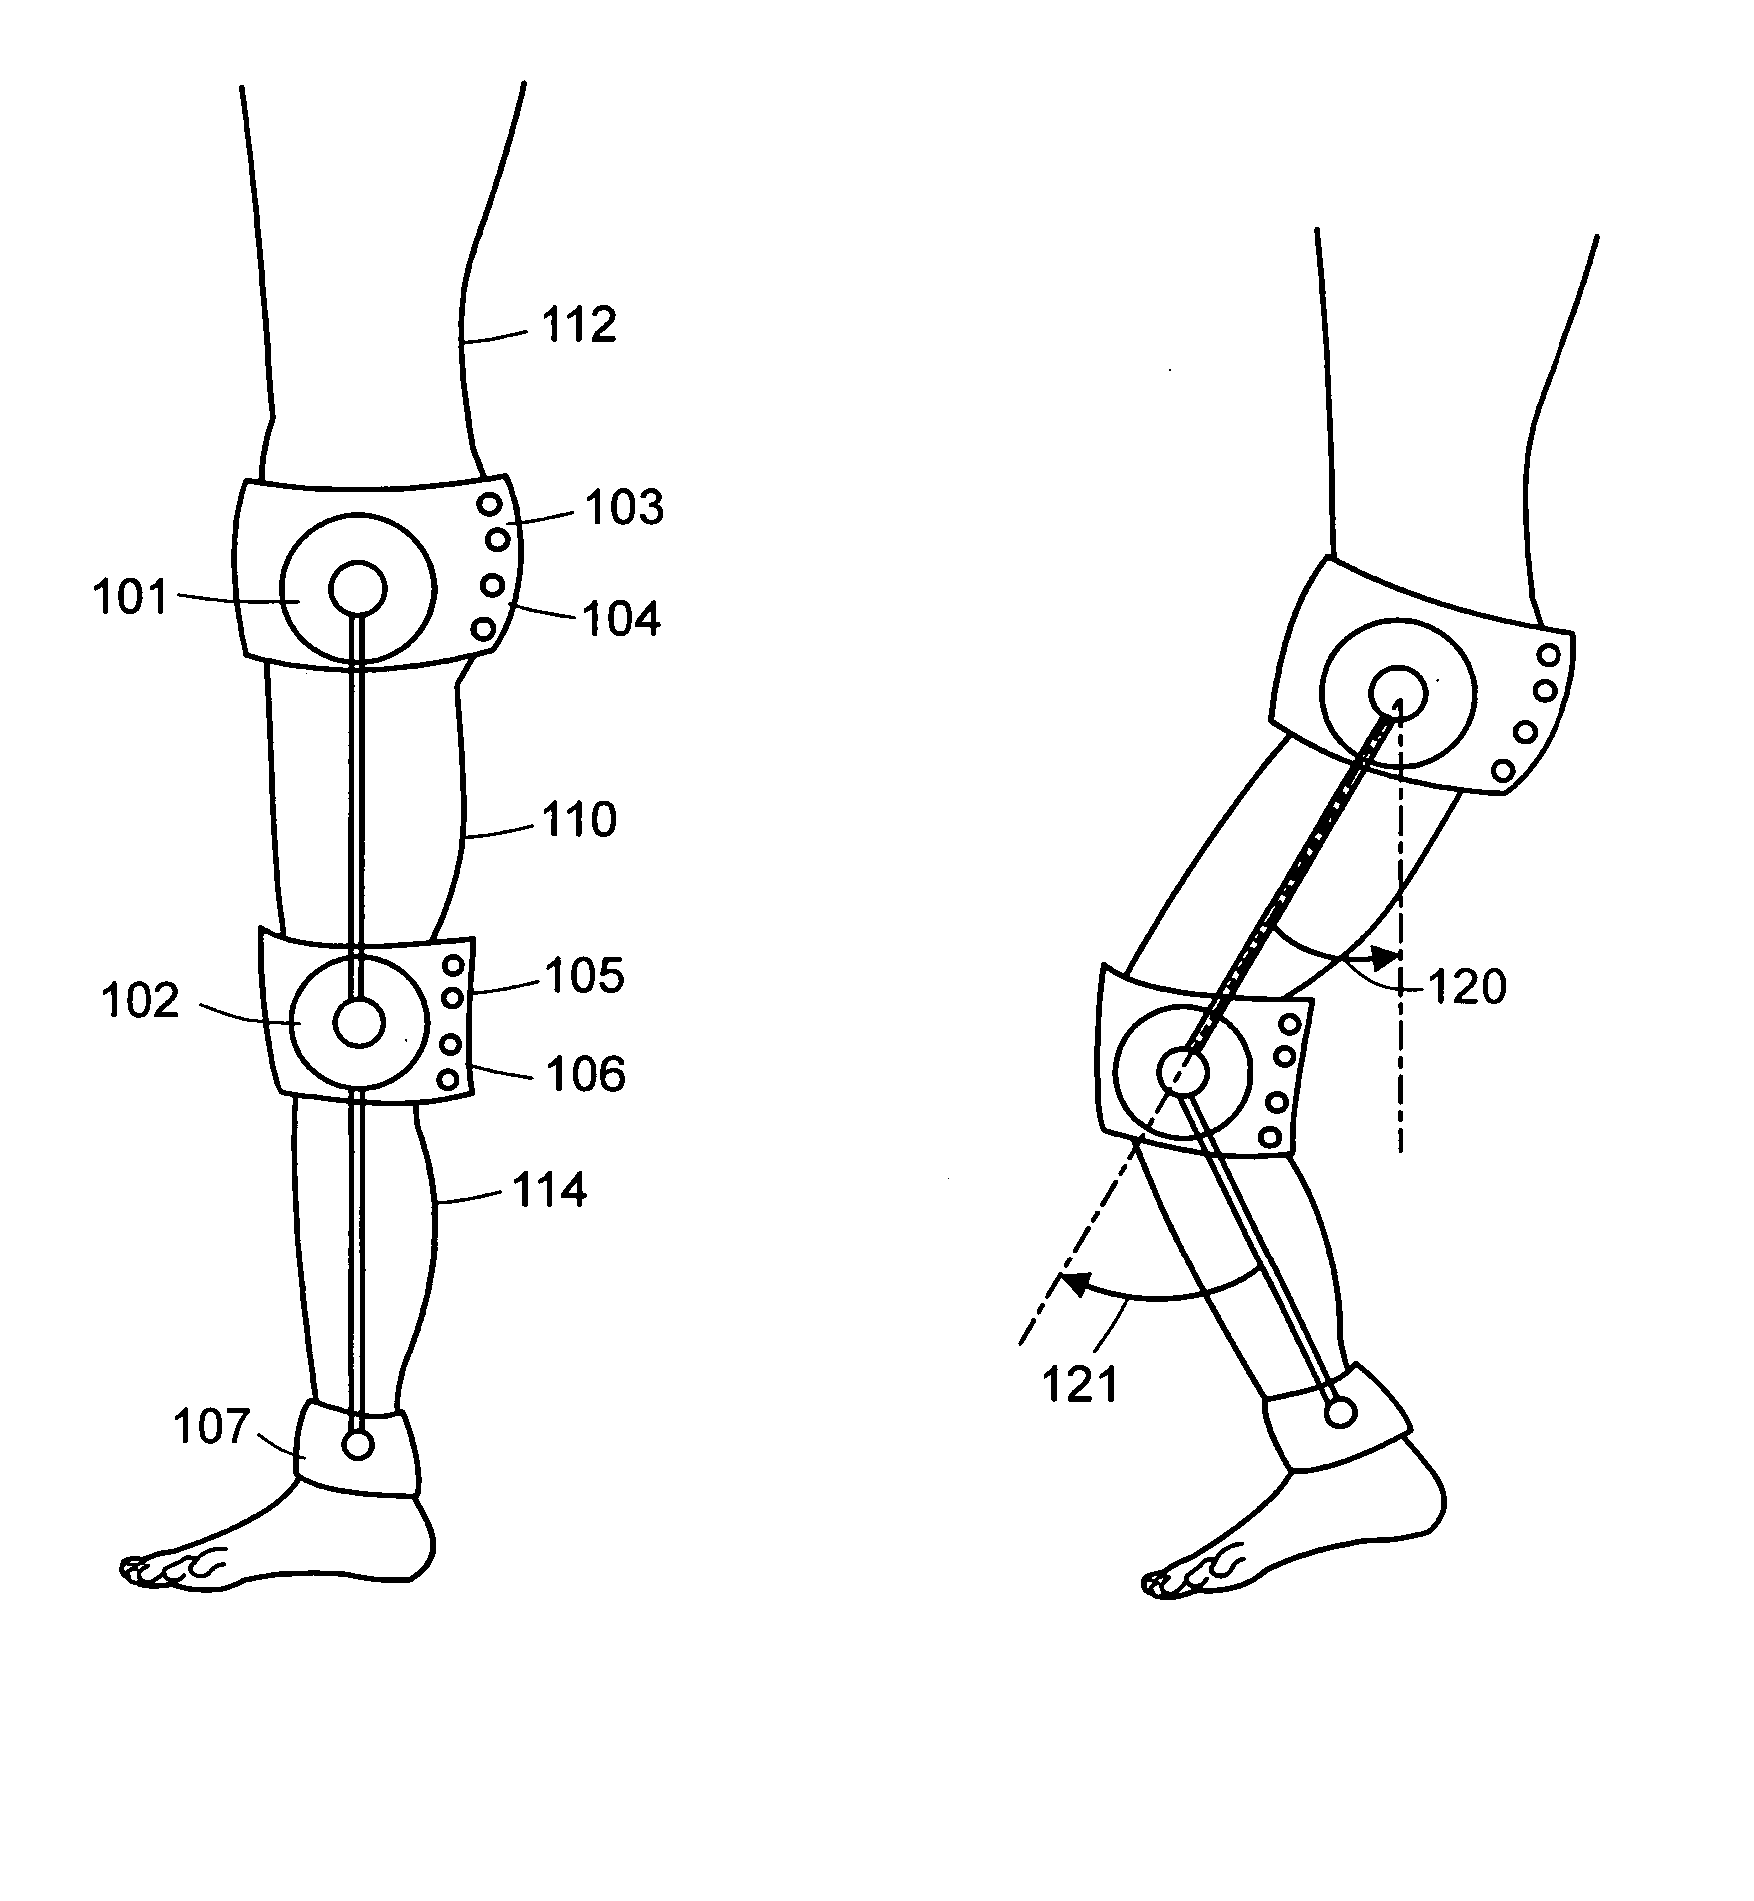 Apparatus and method for characterizing contributions of forces associated with a body part of a subject